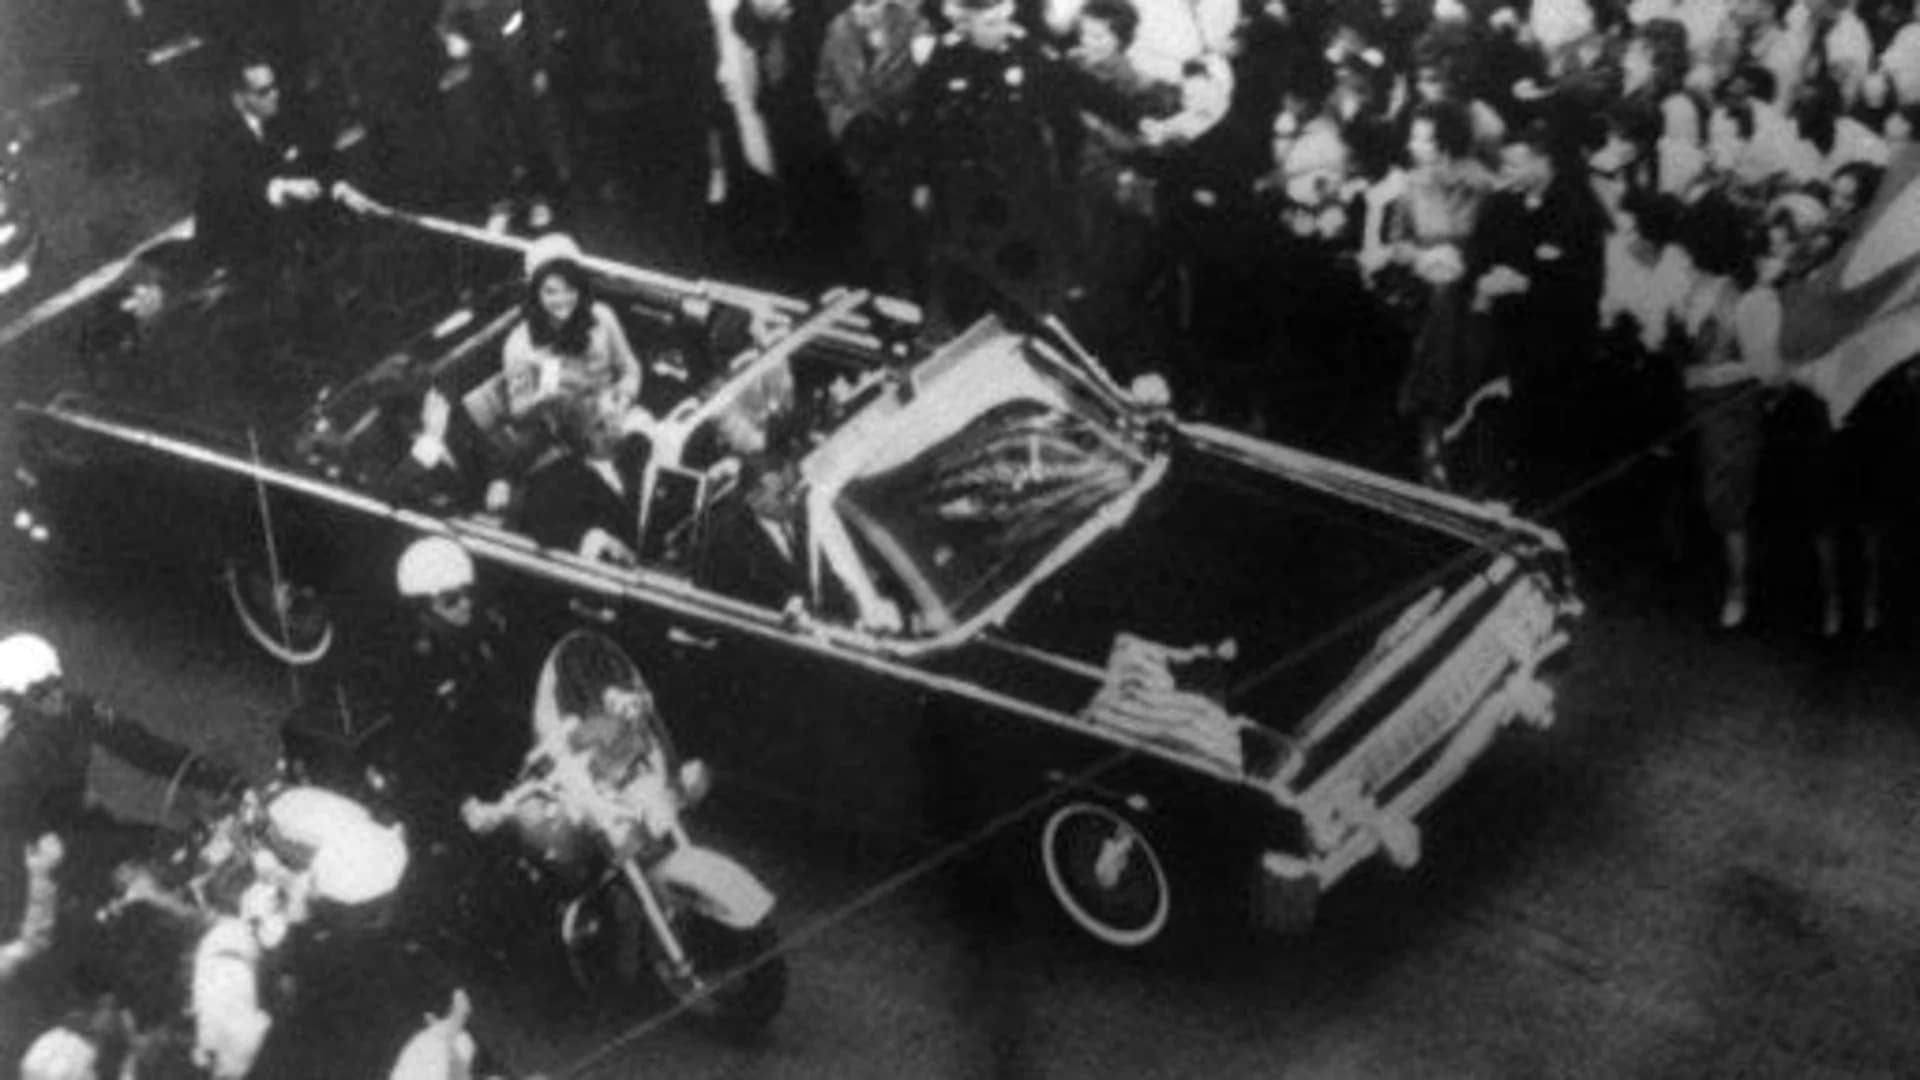 Trump holding back some JFK files, releasing others